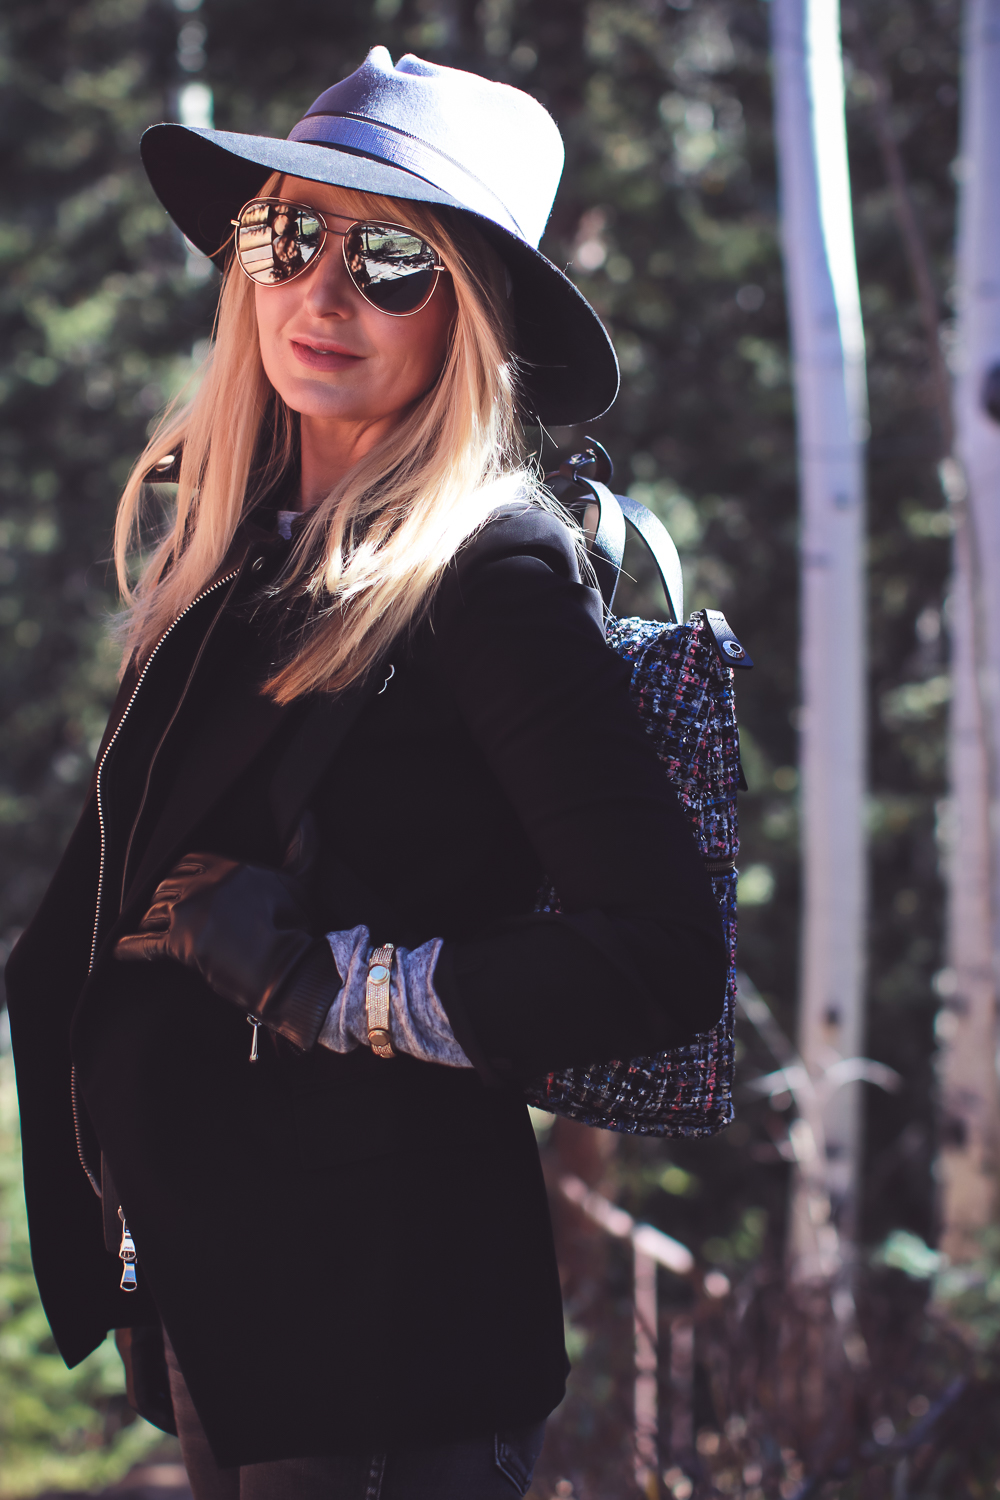 Styling Hats for women for fall and winter, featuring a Henri Bendel felt hat, paired with a jetsetter tweed backpack, veronica beard blazer with leather dickey and amo twist jeans with vince camuto patent booties on fashion blogger over 4o from Busbee Style Erin Busbee